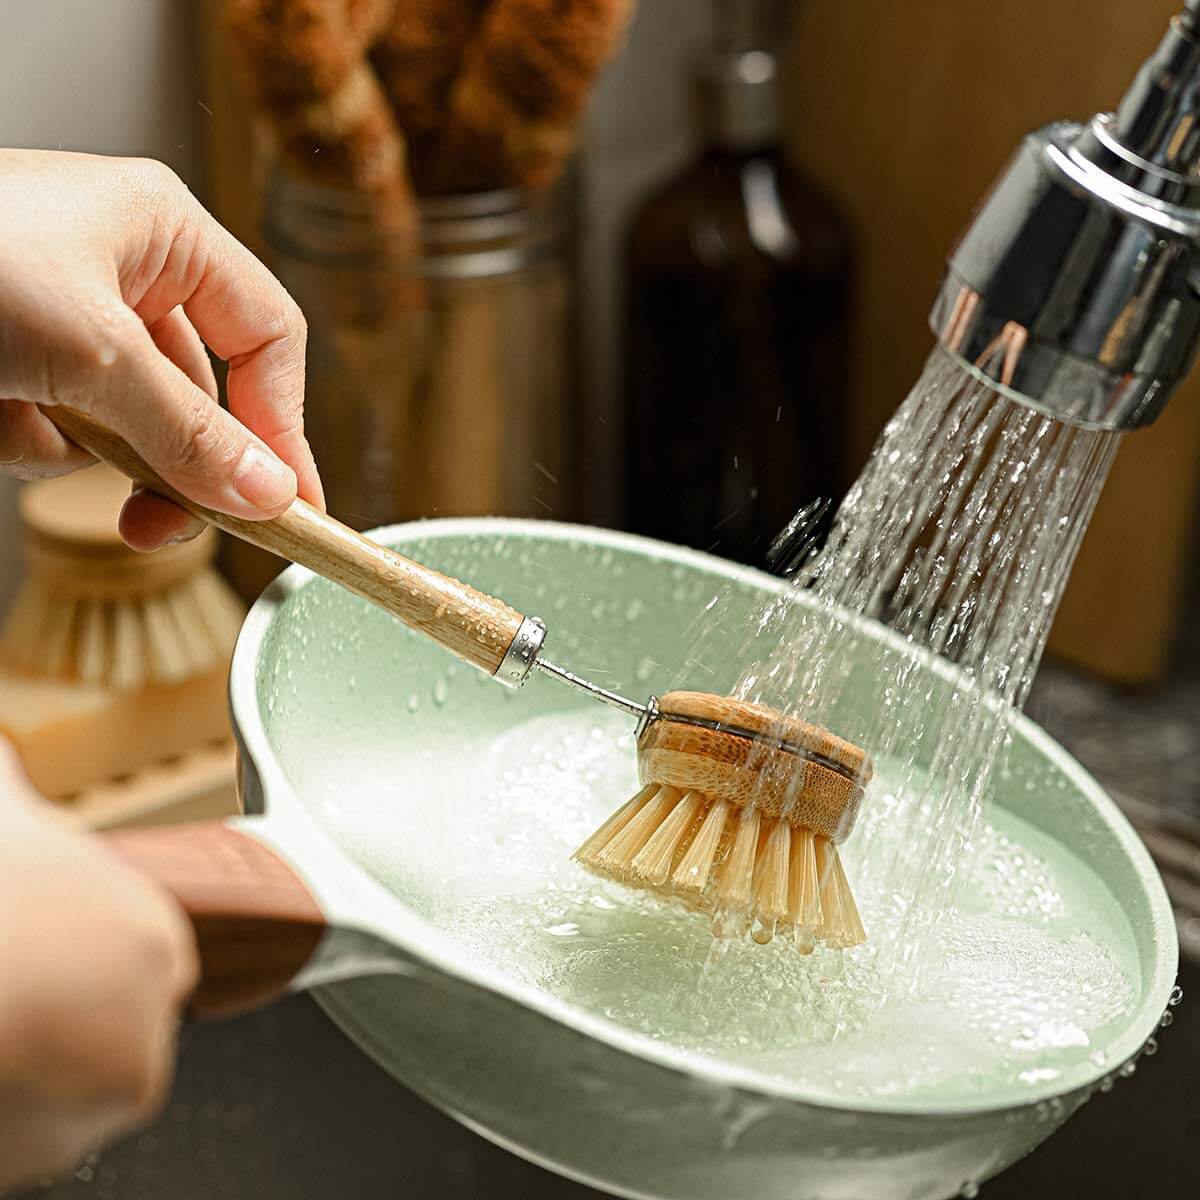 Dish Brushes for Washing Up jungle culture